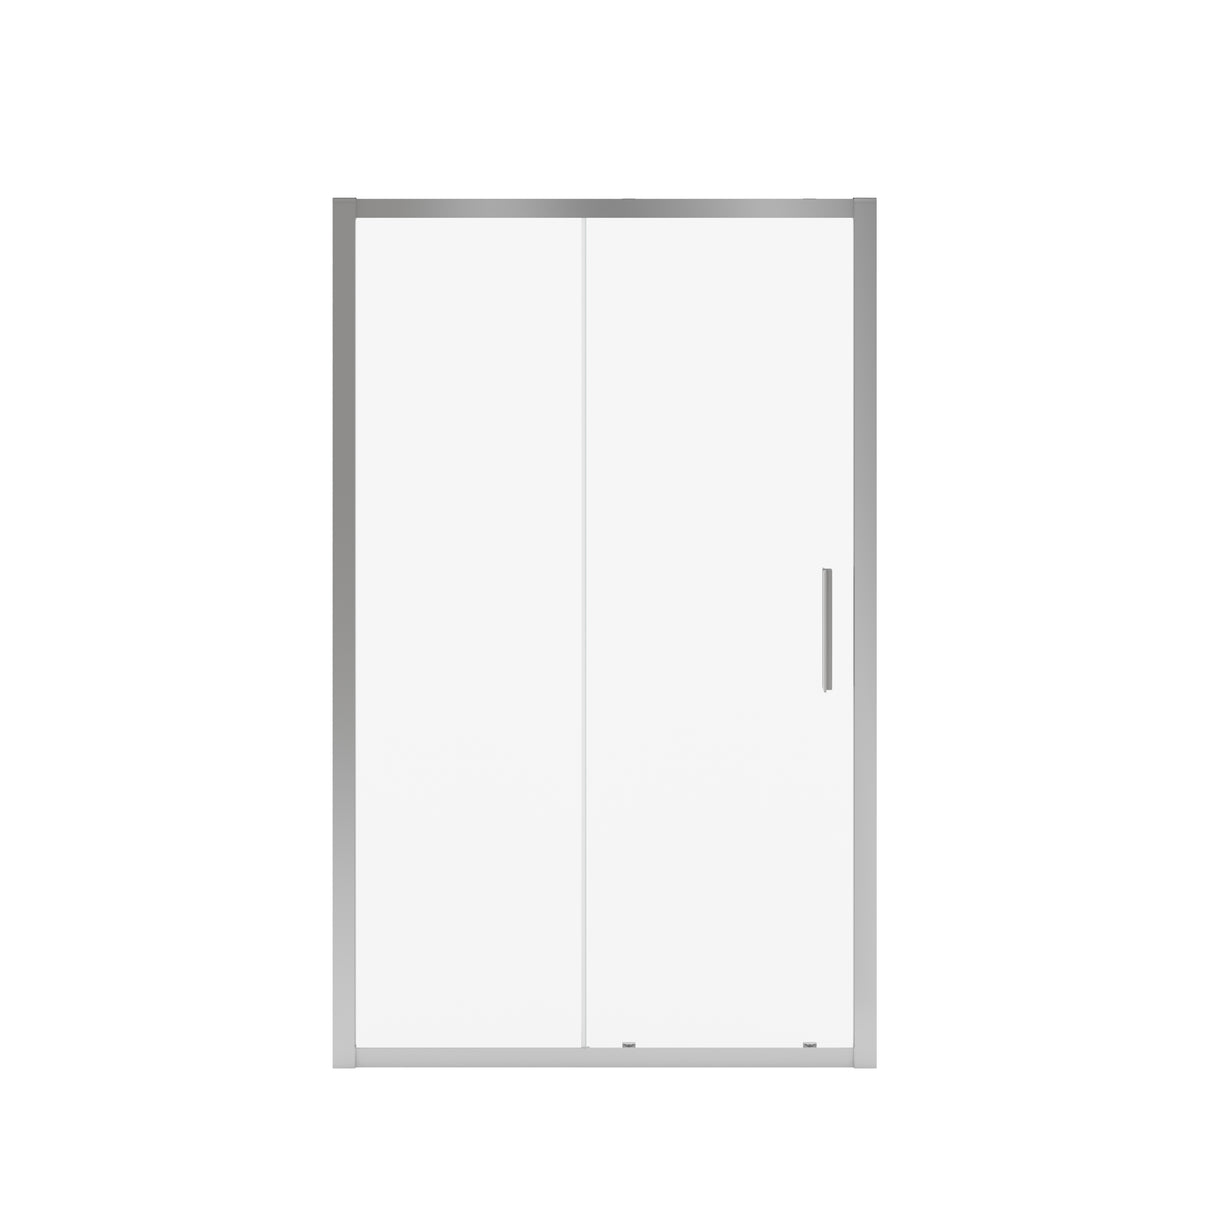 MAAX 135241-900-084-000 Connect 43 ½-45 x 72 in. 6mm Sliding Shower Door for Alcove Installation with Clear glass in Chrome